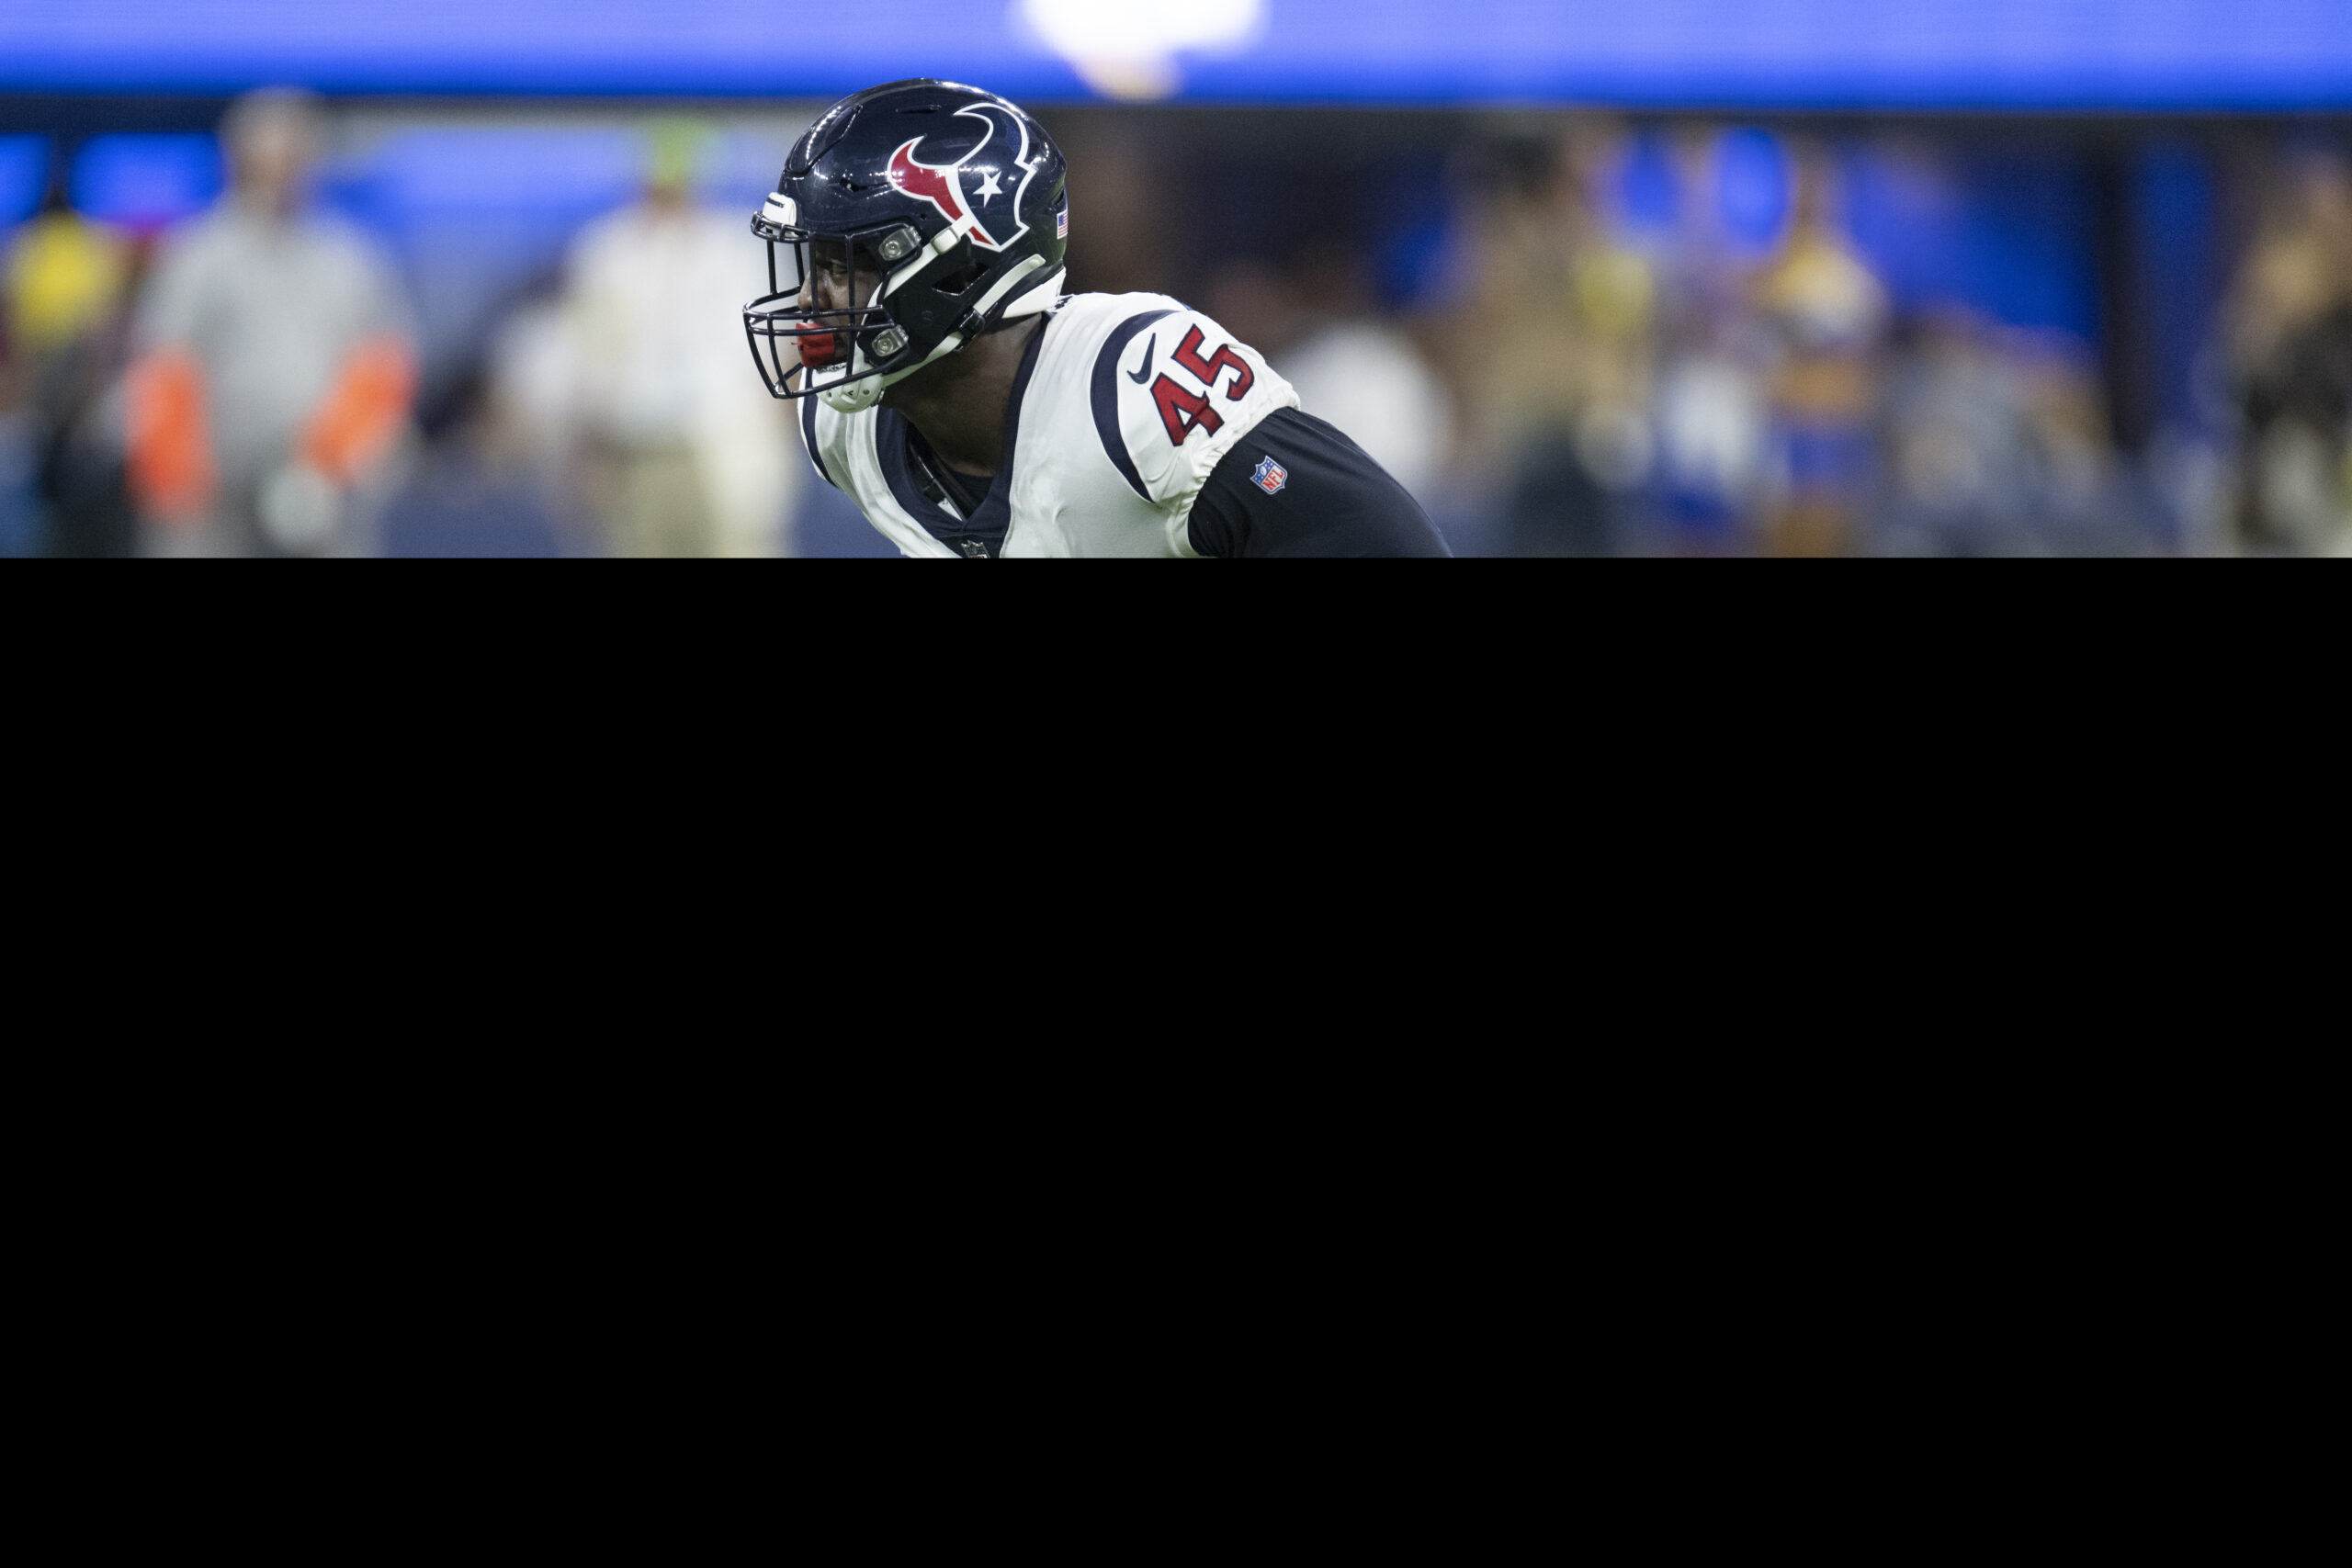 Ogbonnia Okoronkwo considered the Texans’ biggest loss in free agency